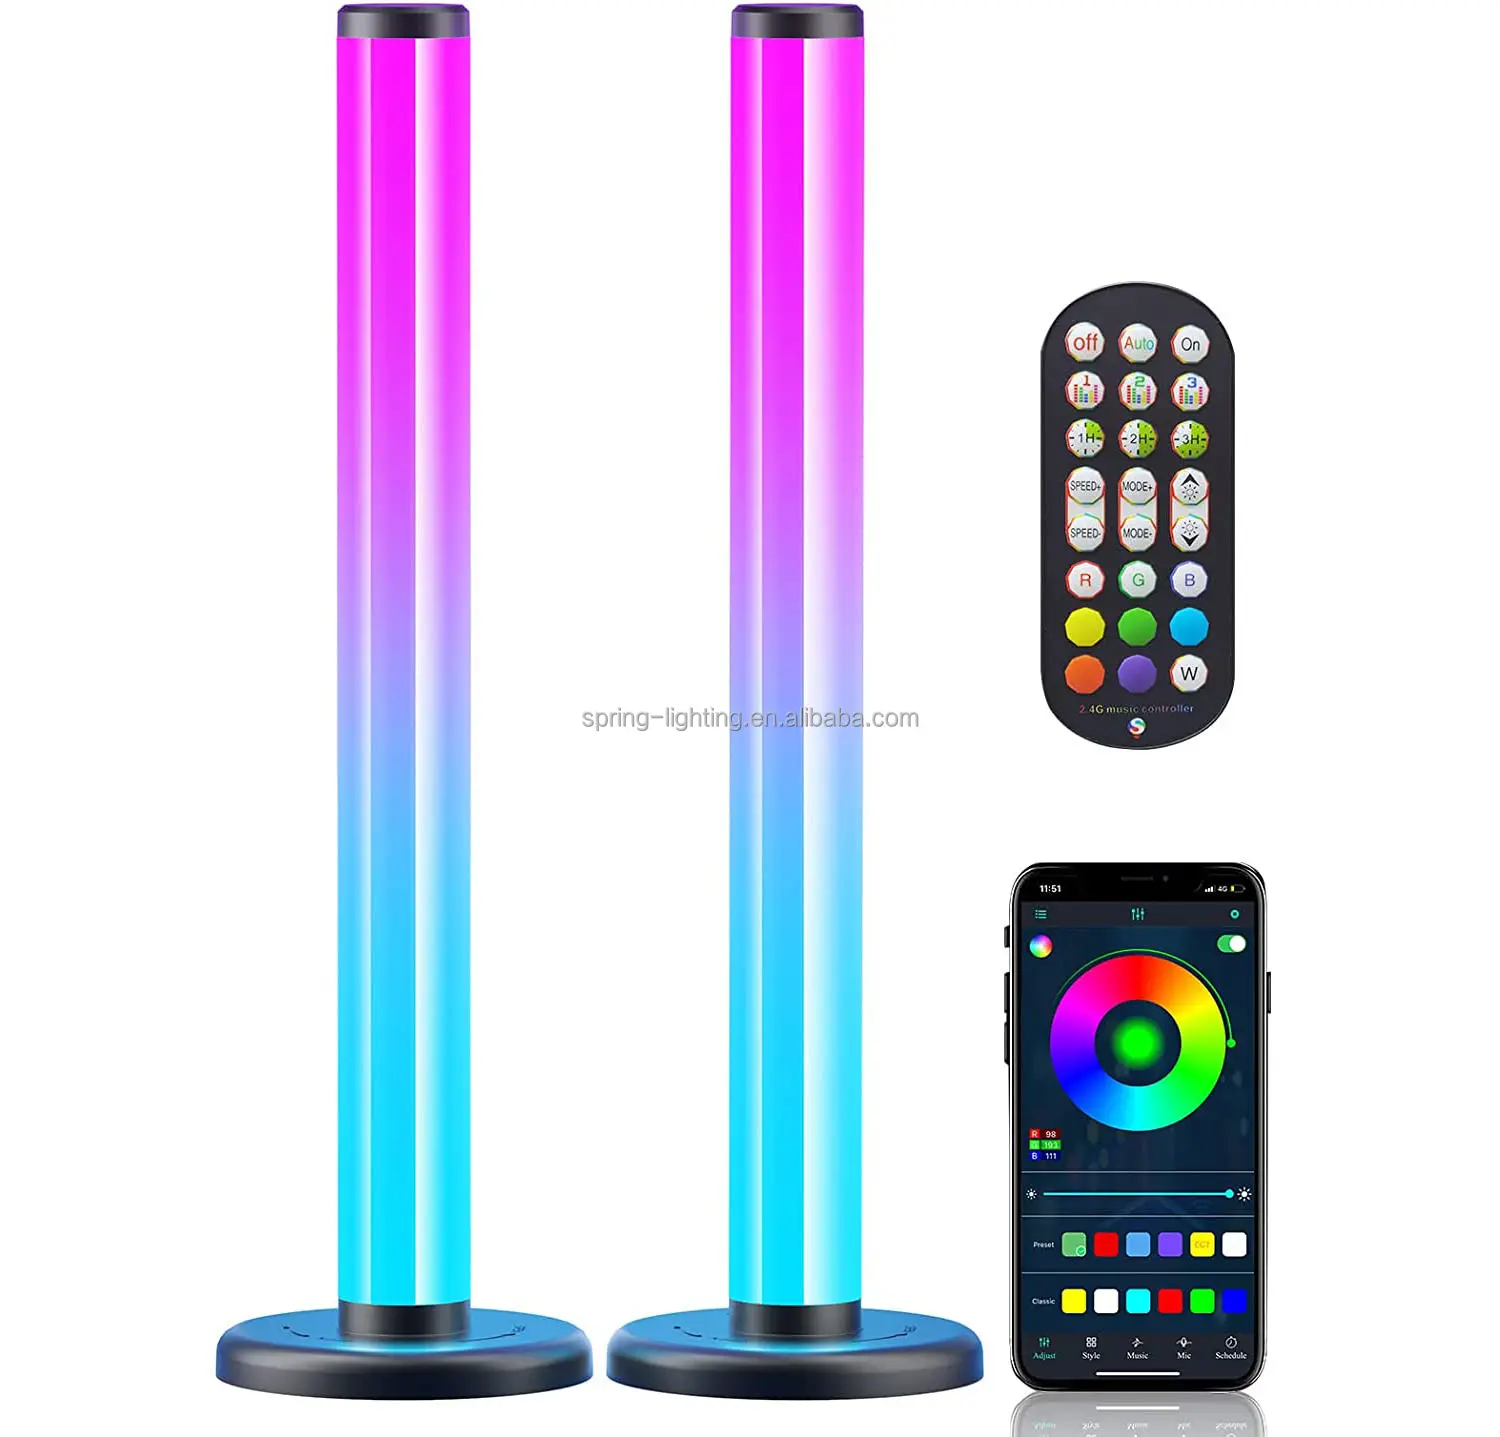 360 degree. lighting Smart LED Light Bars multiple colors changeable for Gaming Table Lamp Controlled by APP music sync